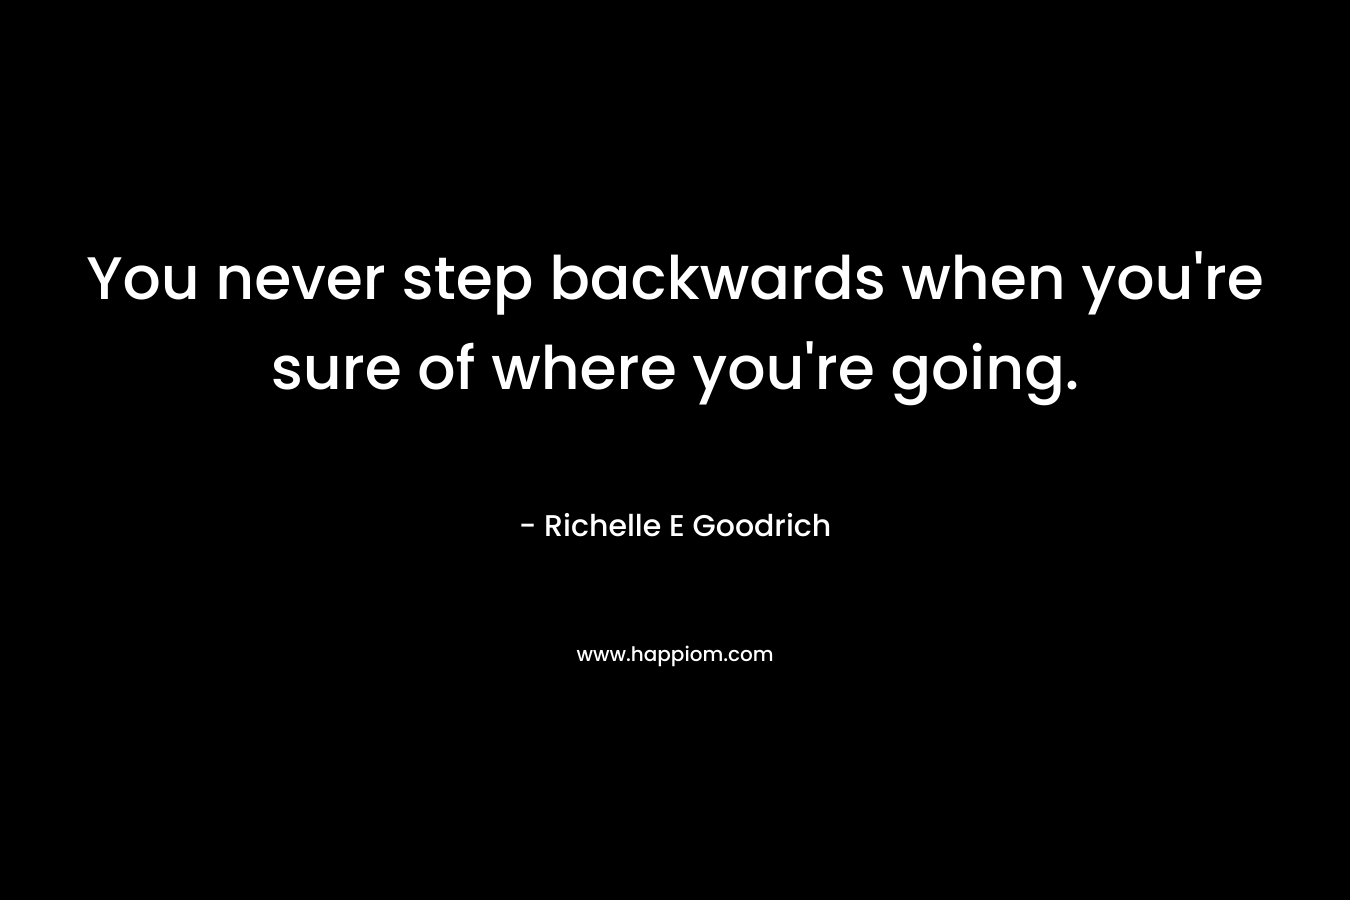 You never step backwards when you're sure of where you're going.